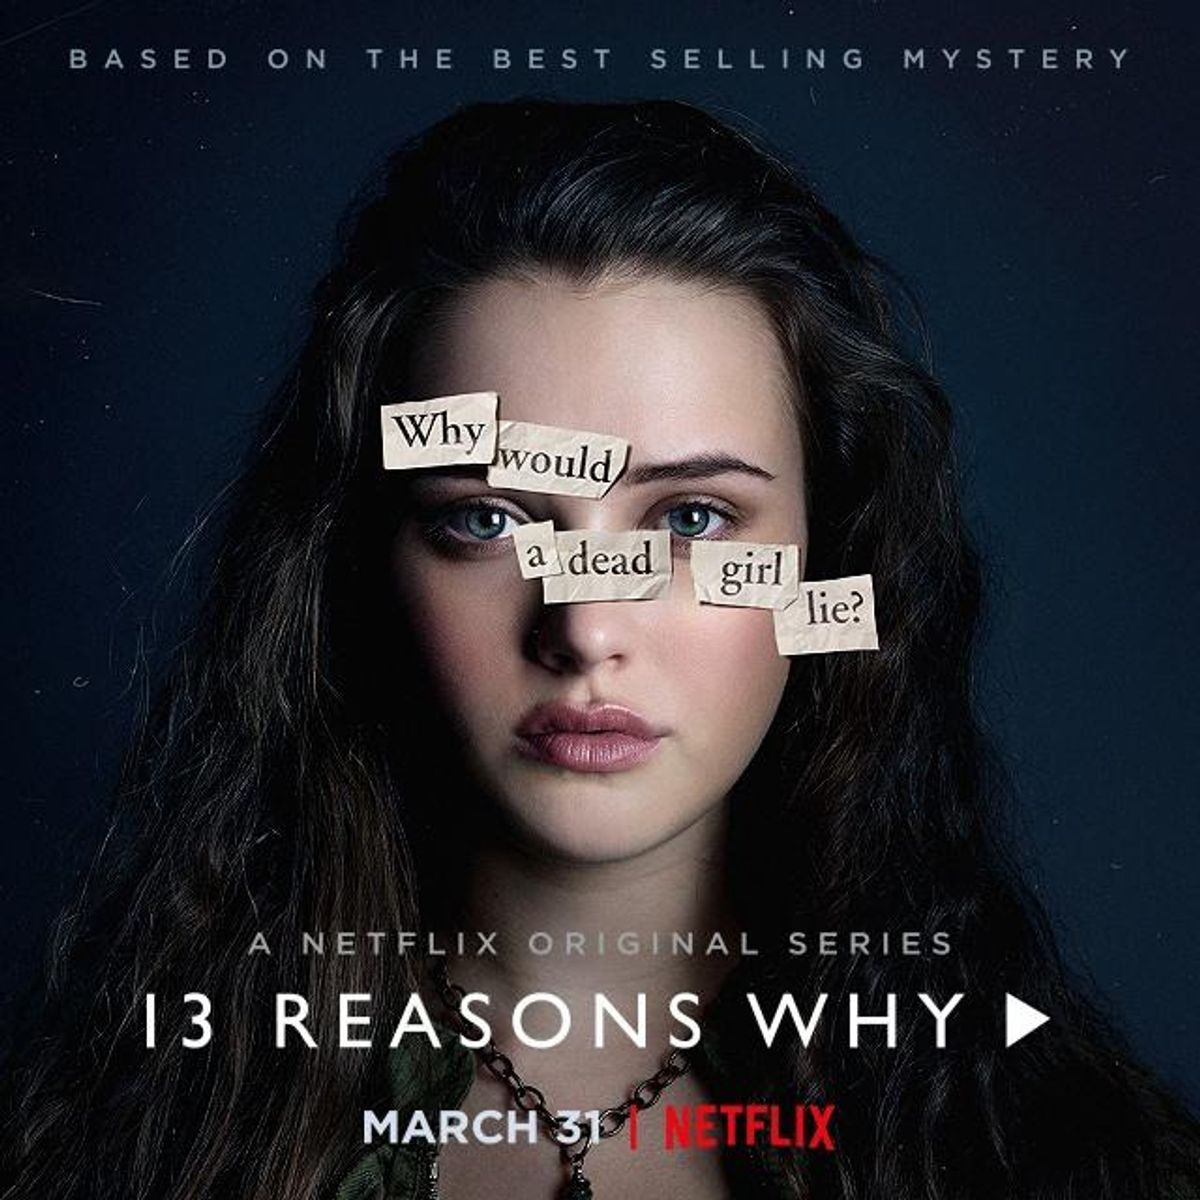 '13 Reasons Why' is Something Everyone Should Watch